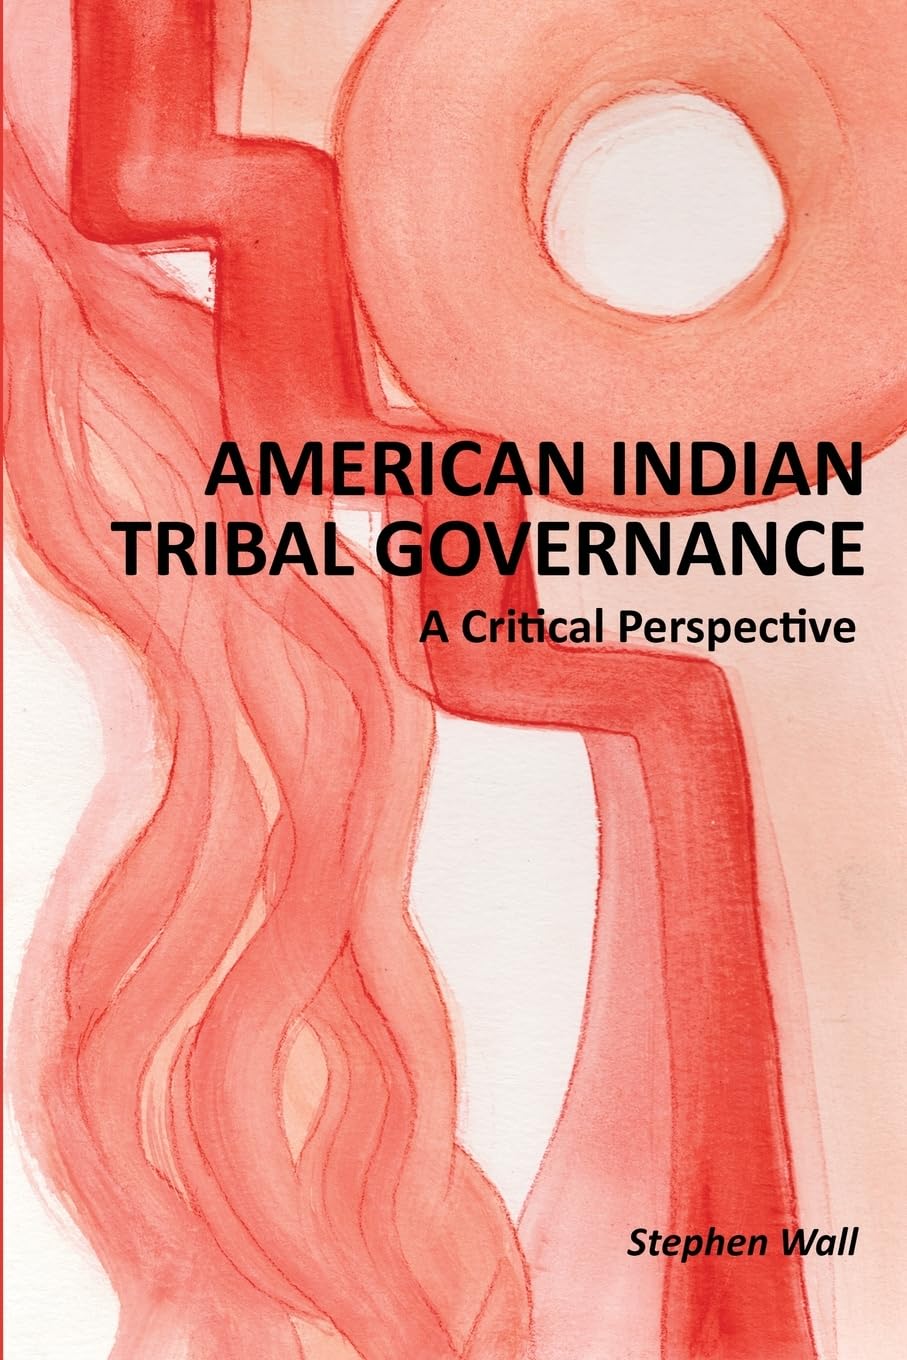 American Indian Tribal Governance: A Critical Perspective by Stephen Wall